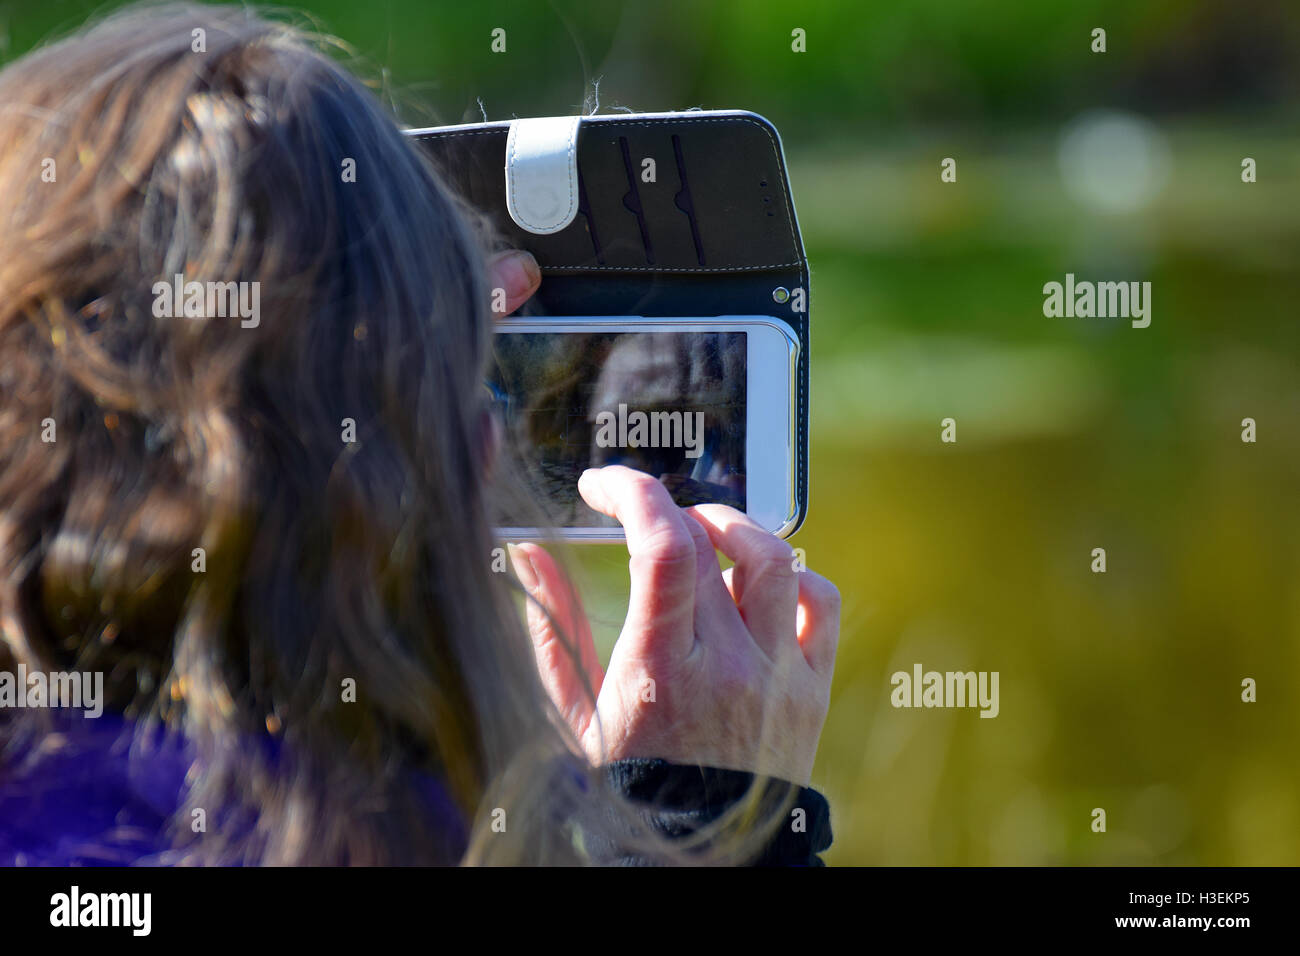 Woman taking a picture with her smart phone. Touch screen as a mirror, showing part of her faces. Stock Photo